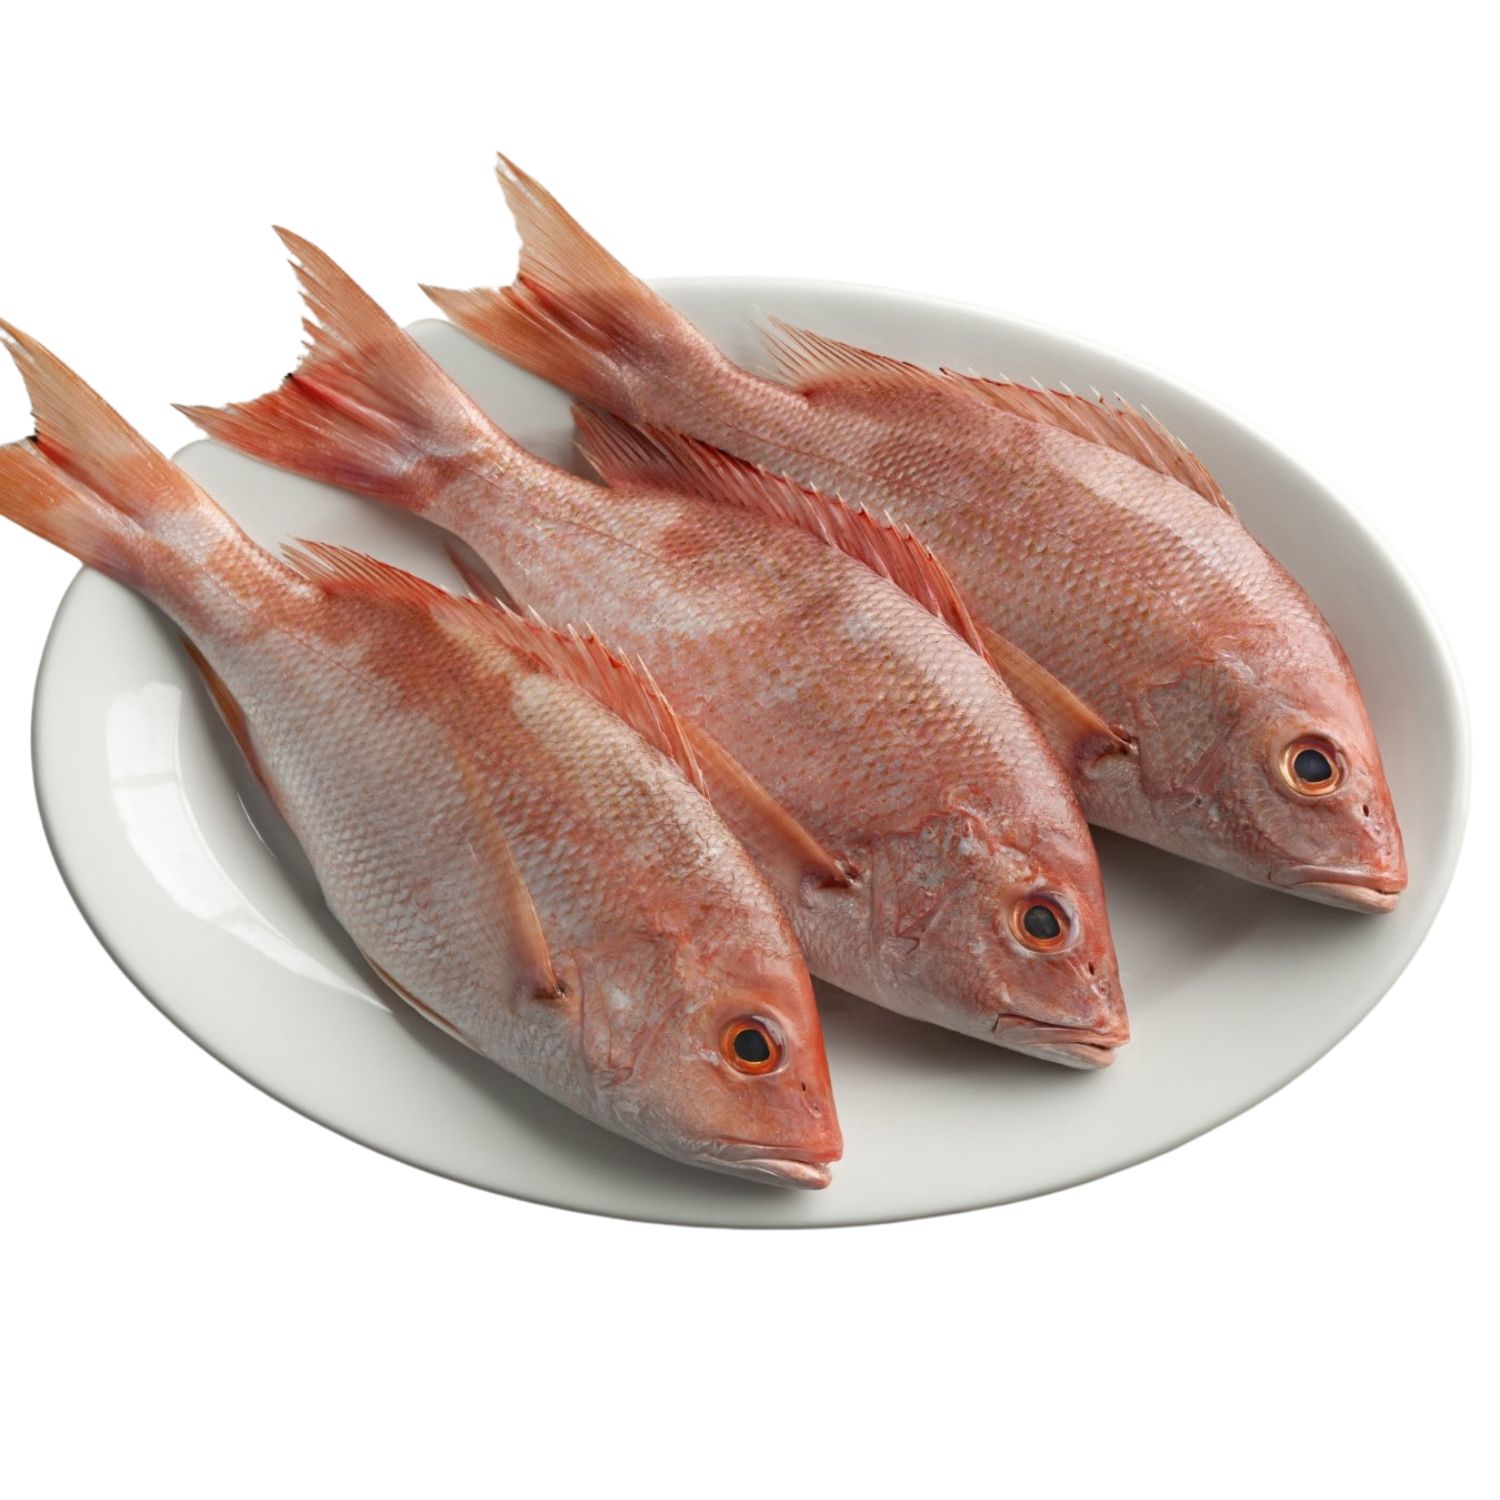 Red Snapper Fish - Cut,Cleaned